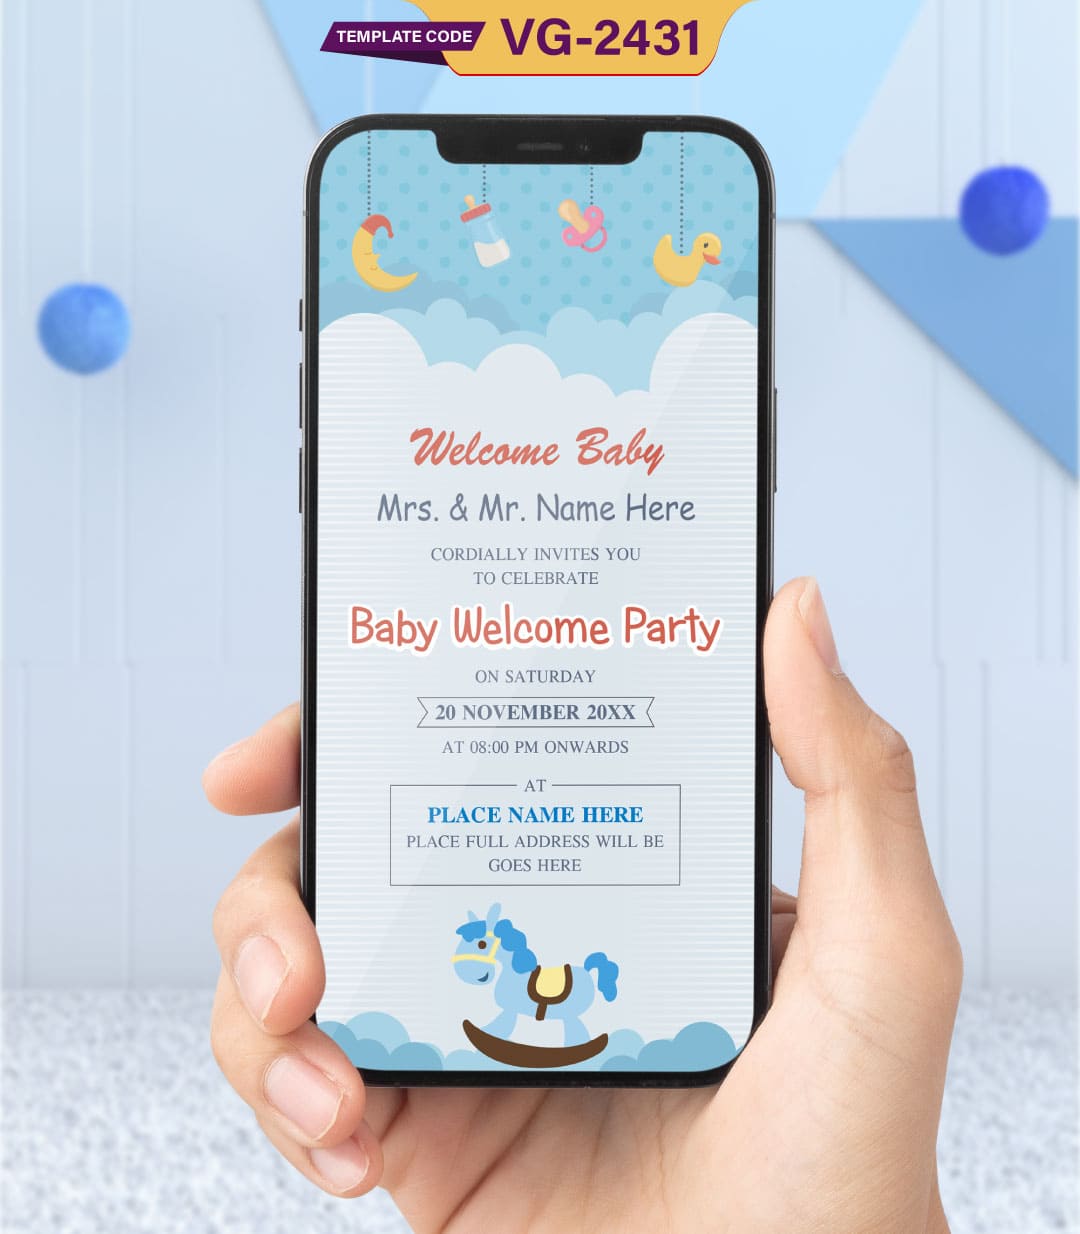 Welcome Baby Invitations